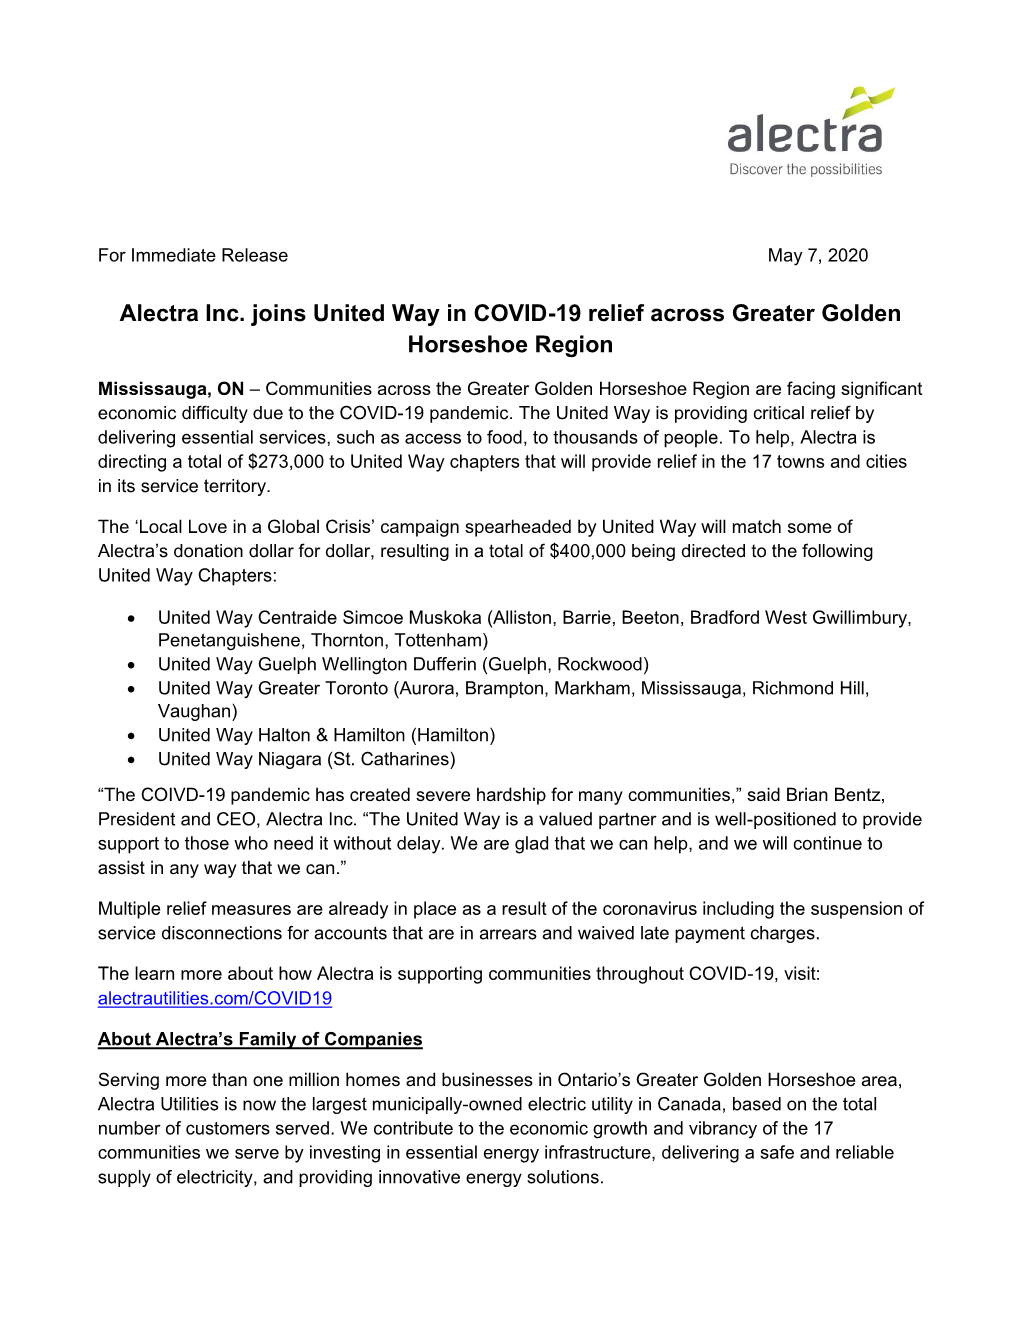 Alectra Inc. Joins United Way in COVID-19 Relief Across Greater Golden Horseshoe Region